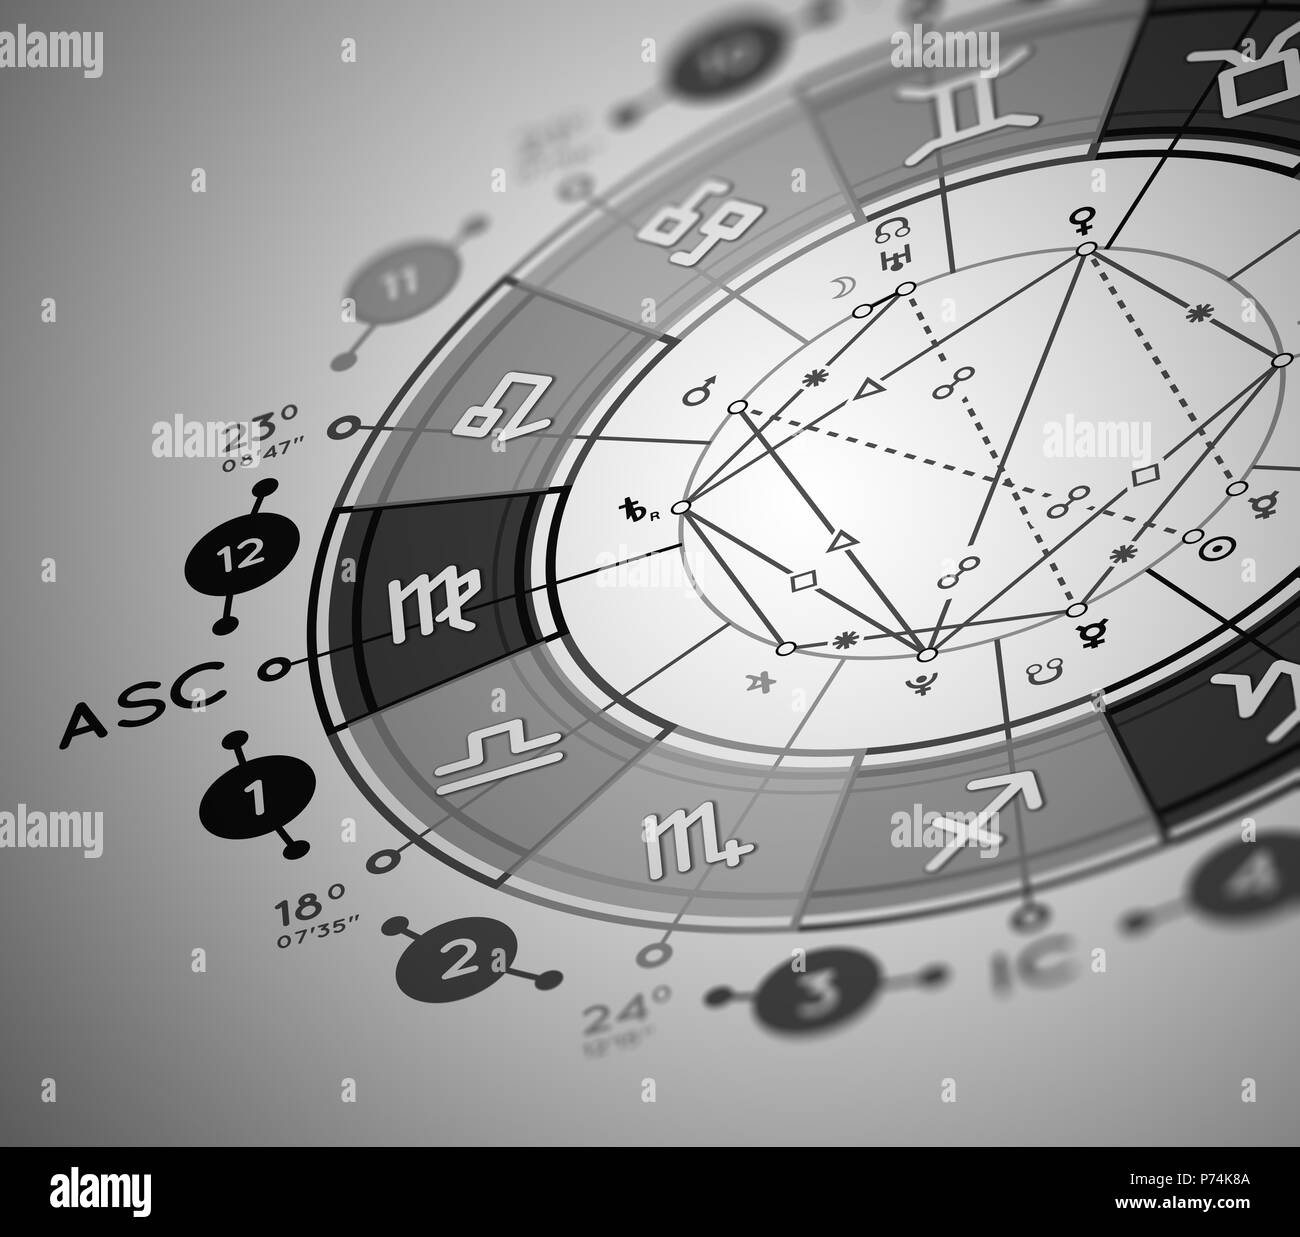 Astrology natal chart background Stock Photo